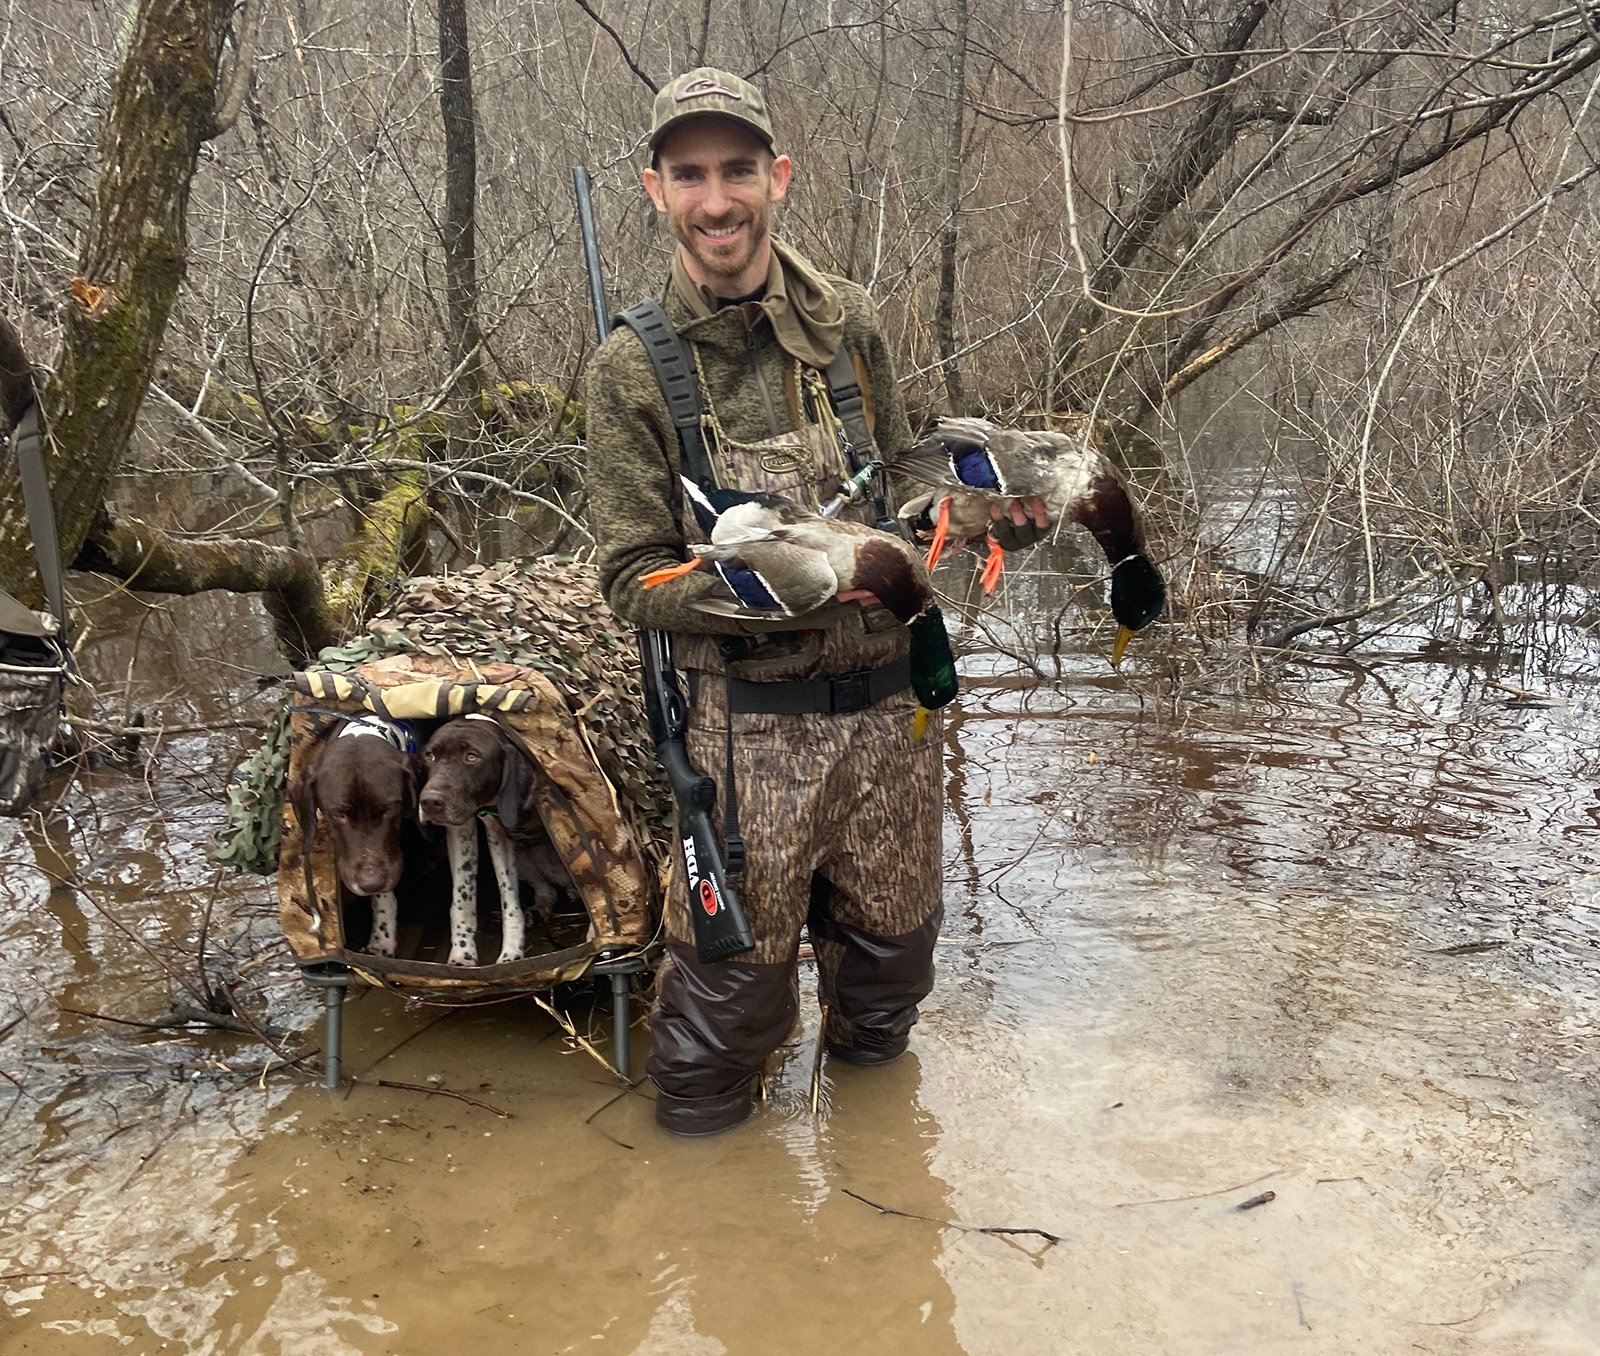 A hunter in camouflage standing in water in a marsh, holding two dead mallard ducks. Two retrieving dogs are in a crate elevated above the water next to him.